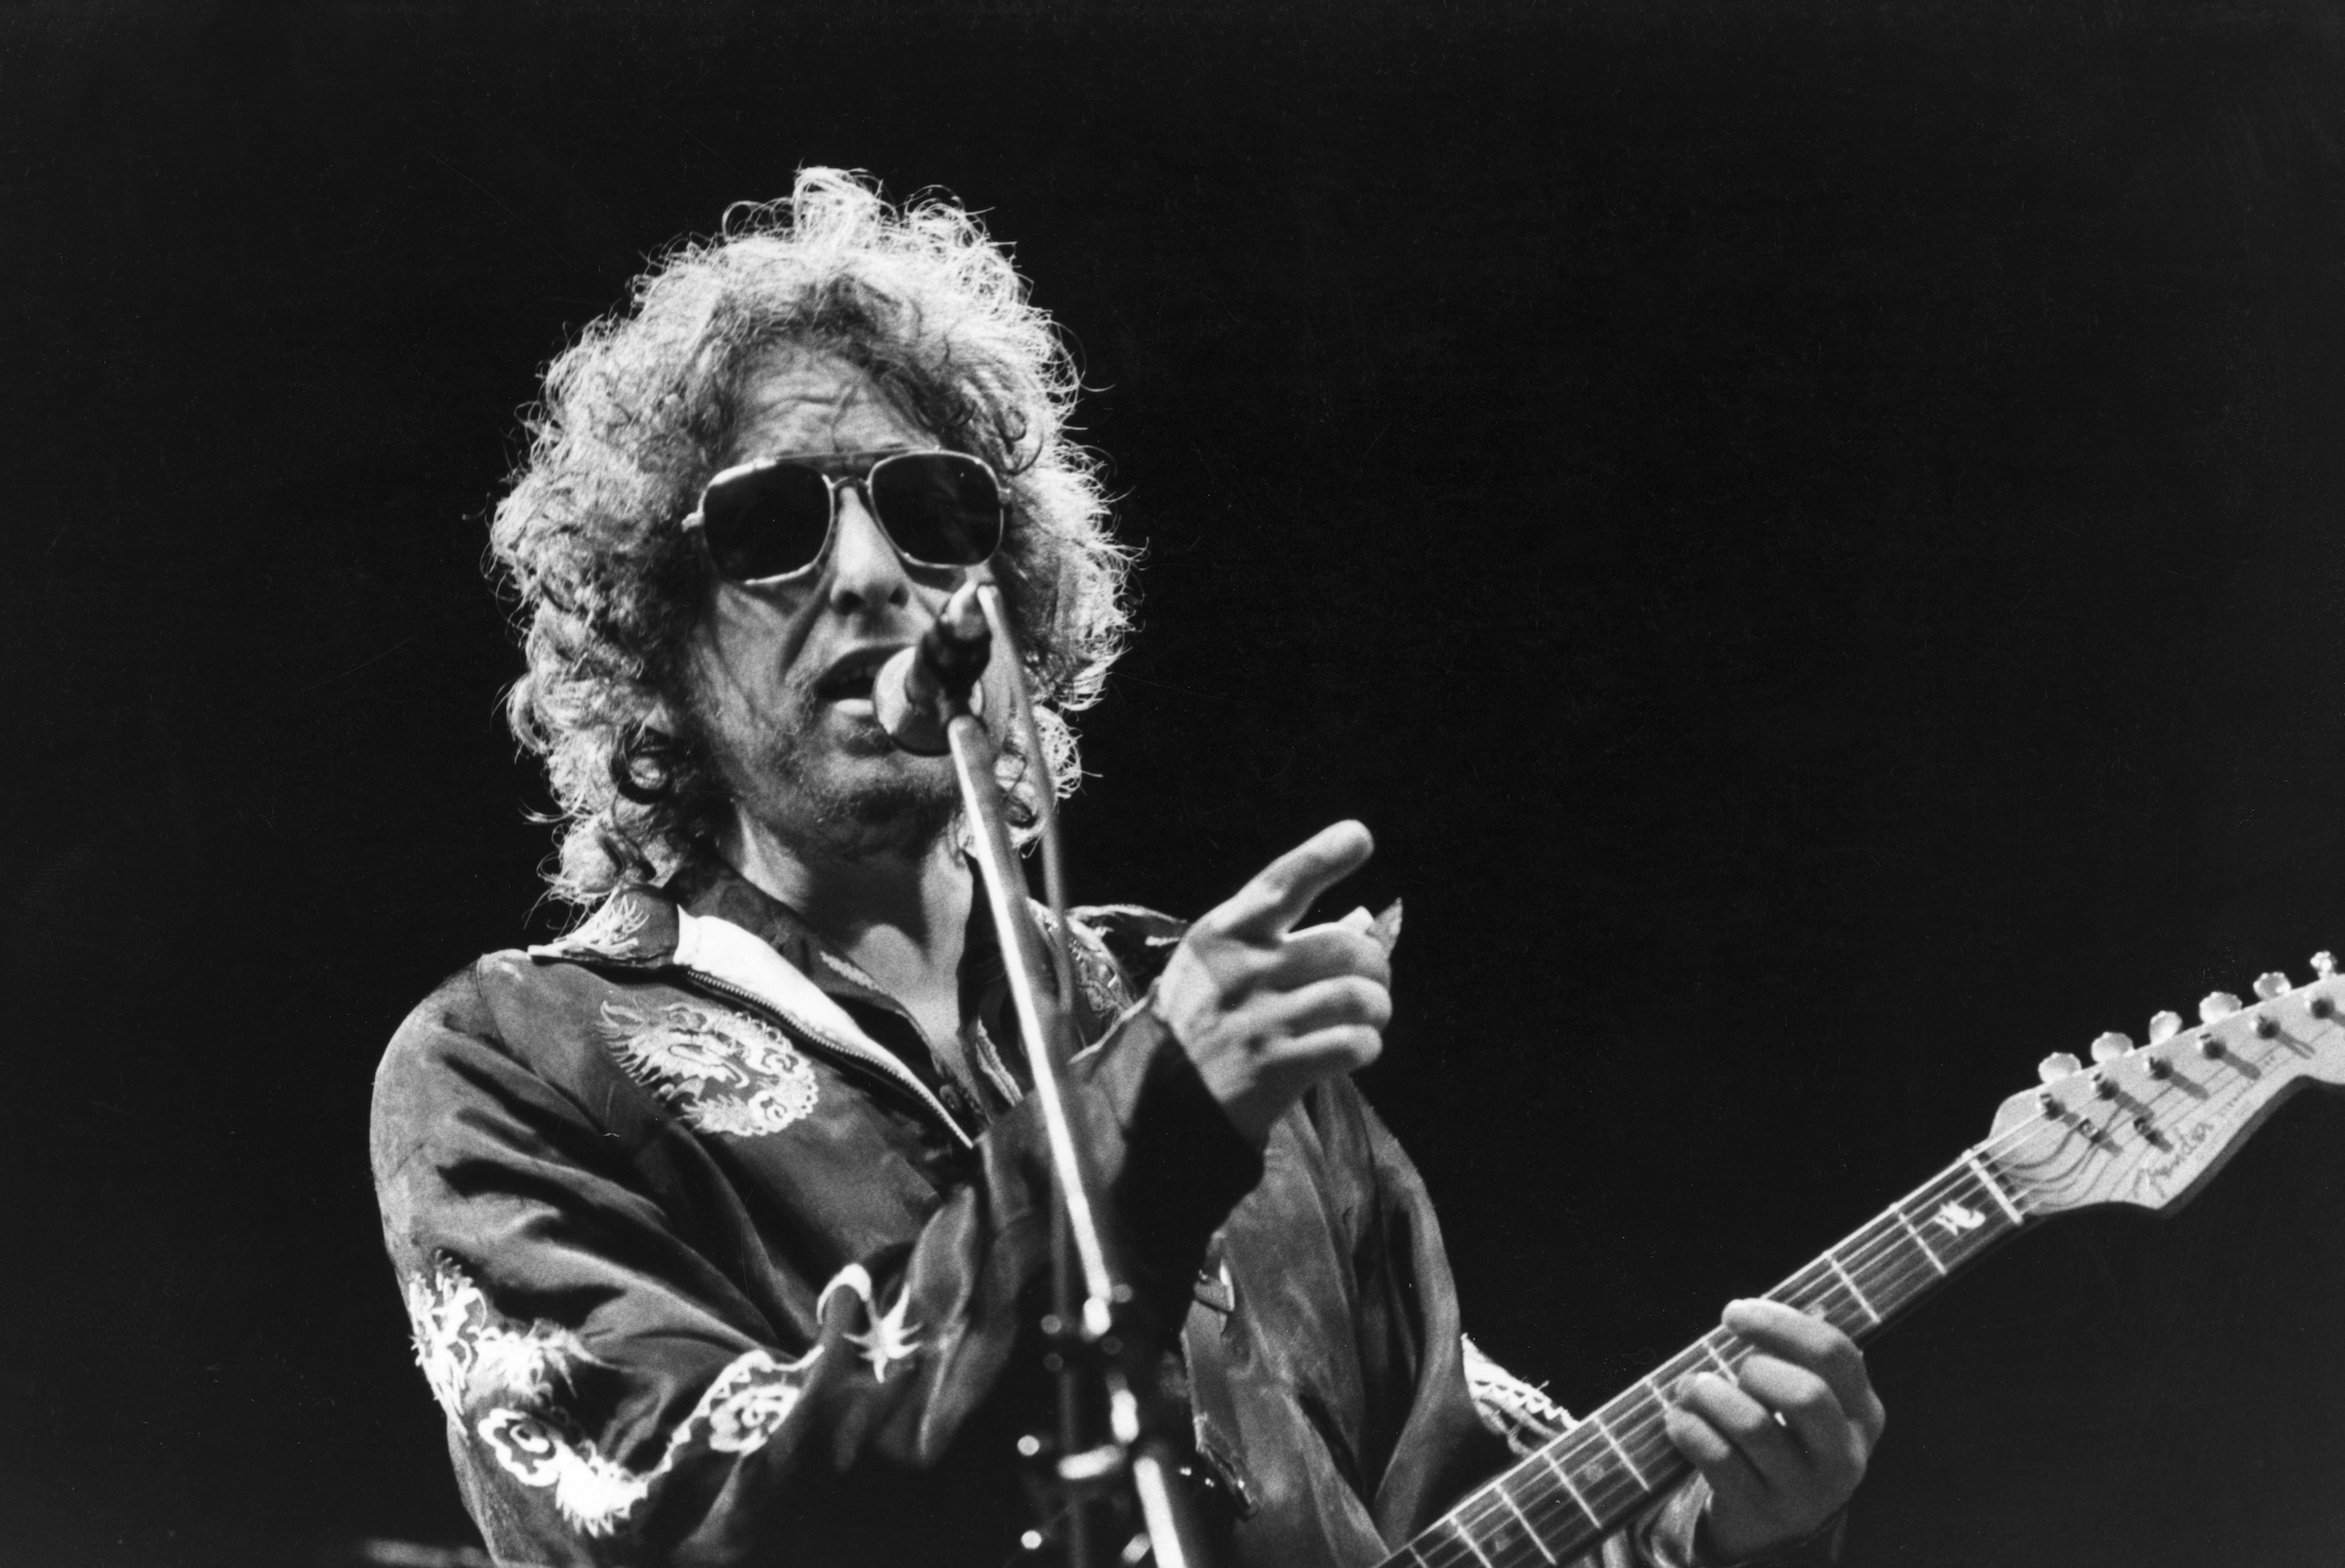 Bob Dylan performs at a concert in 1981 in Toulouse, France